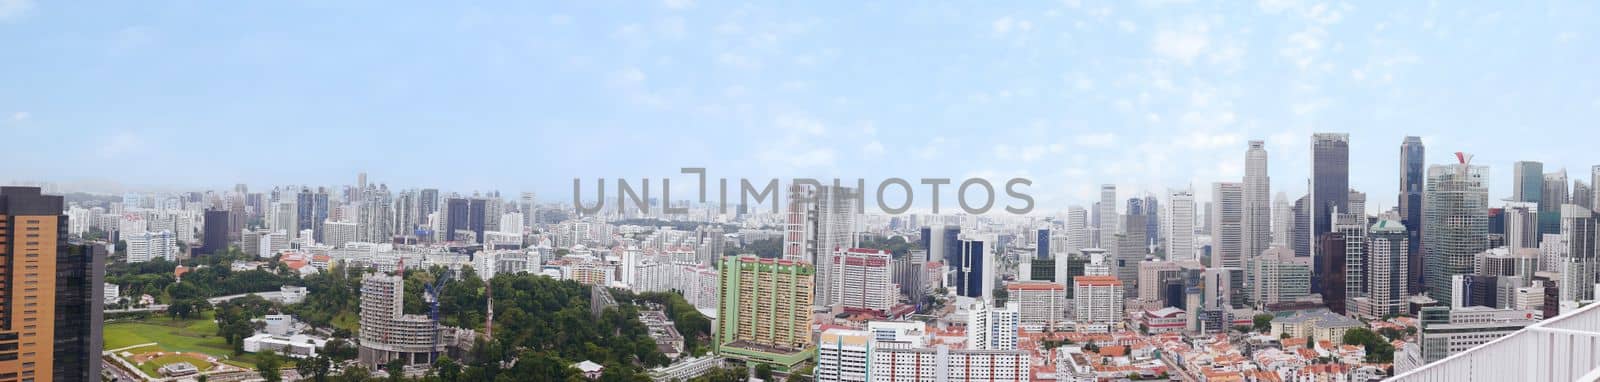 panorama of singapore city buildings sunny day by towfiq007